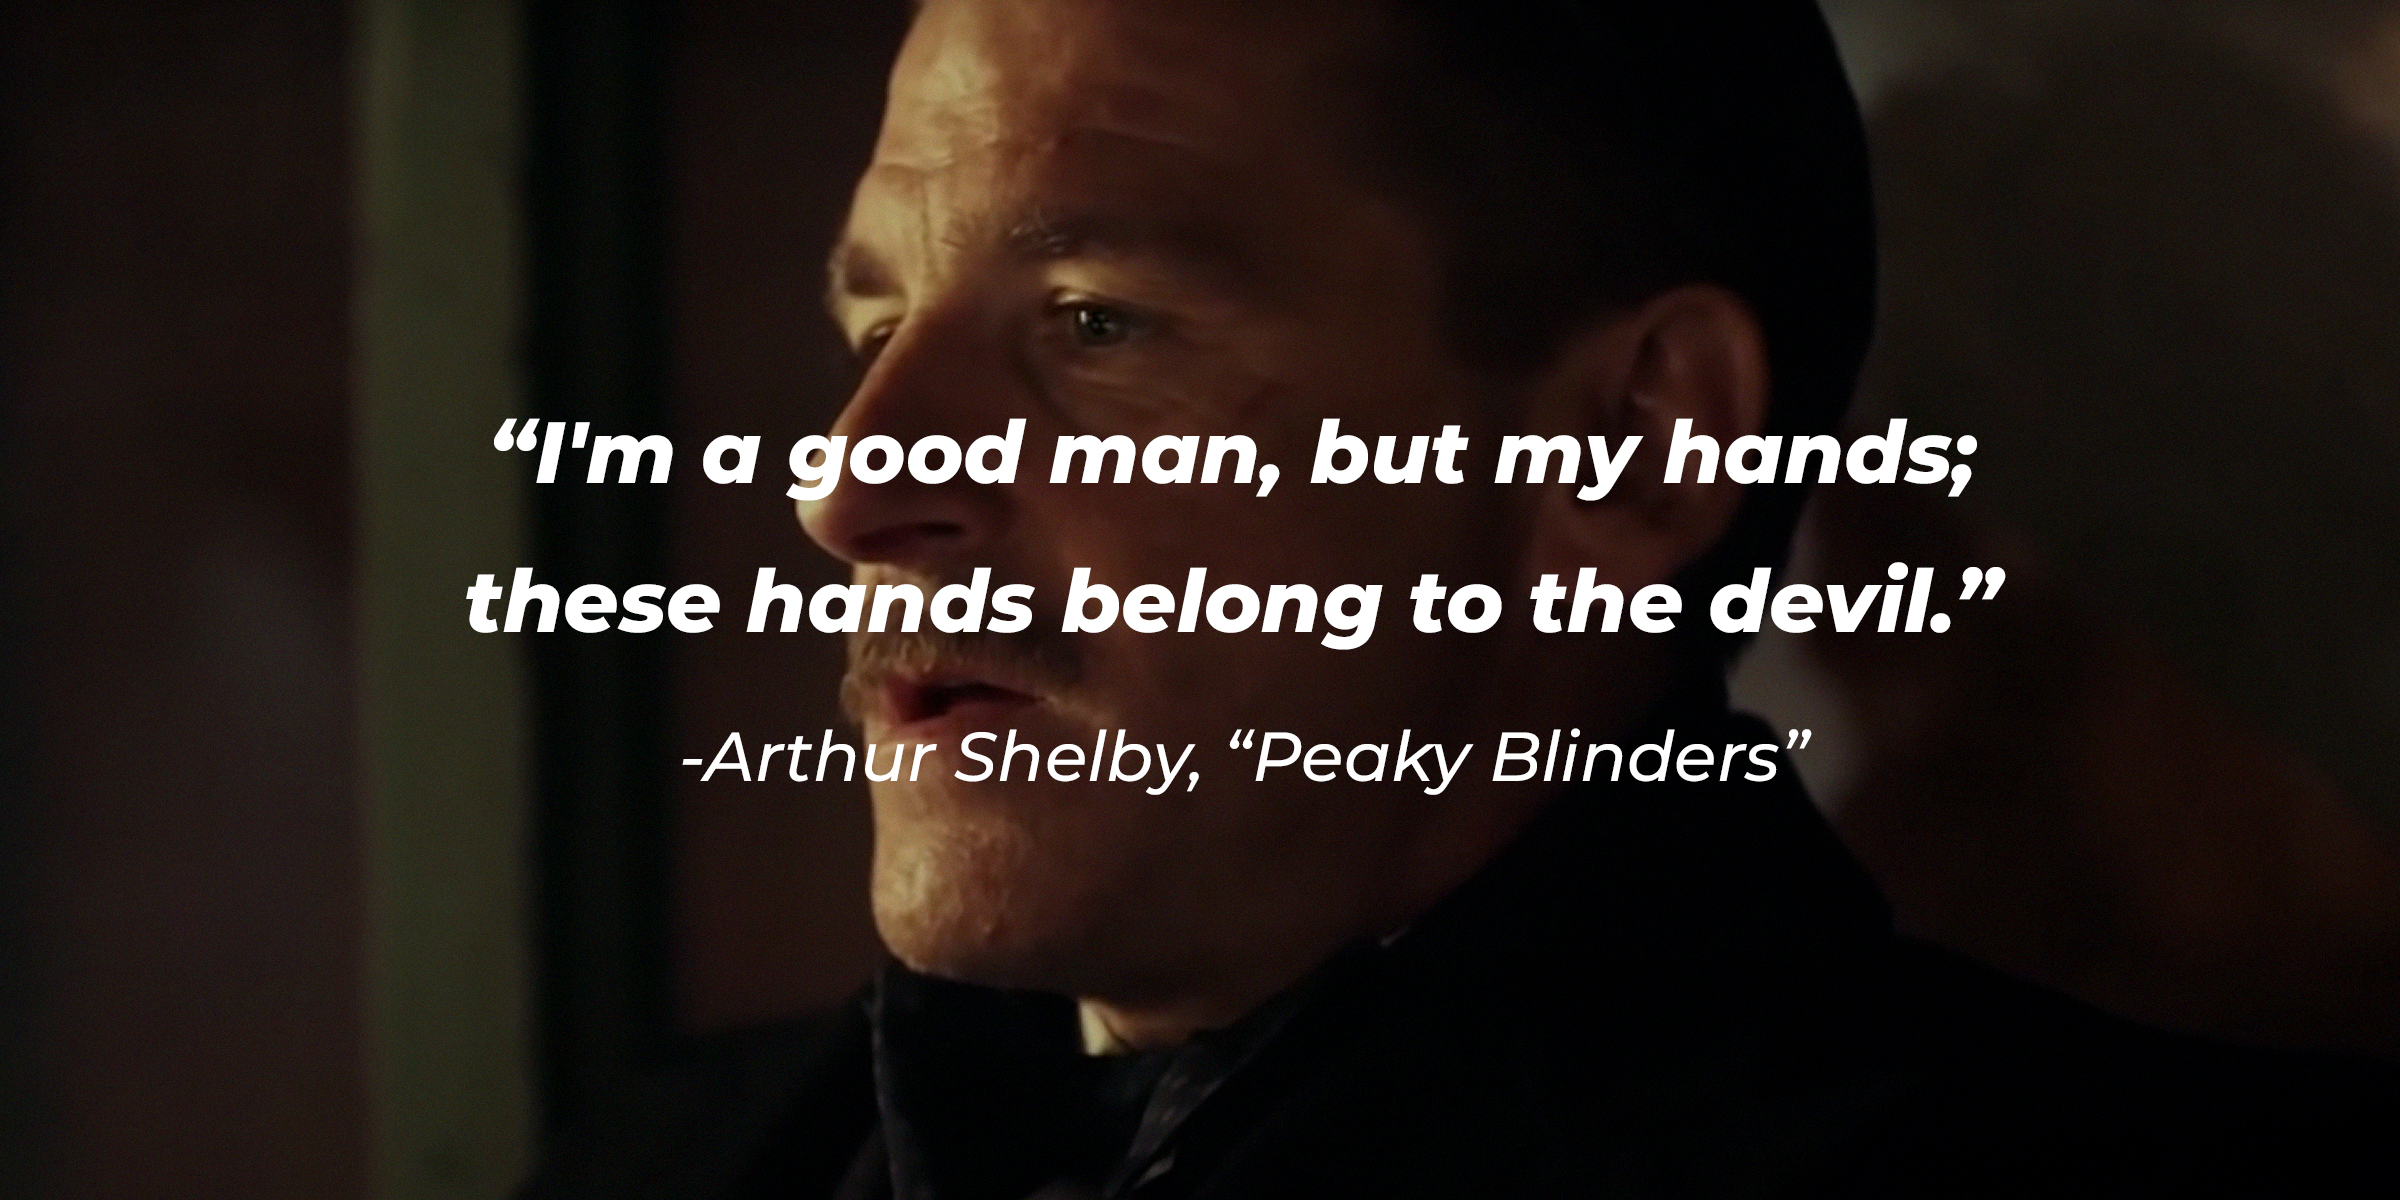 Arthur Shelby with his quote in "Peaky Blinders:" "I'm a good man, but my hands; these hands belong to the devil." | Source: Facebook.com/PeakyBlinders